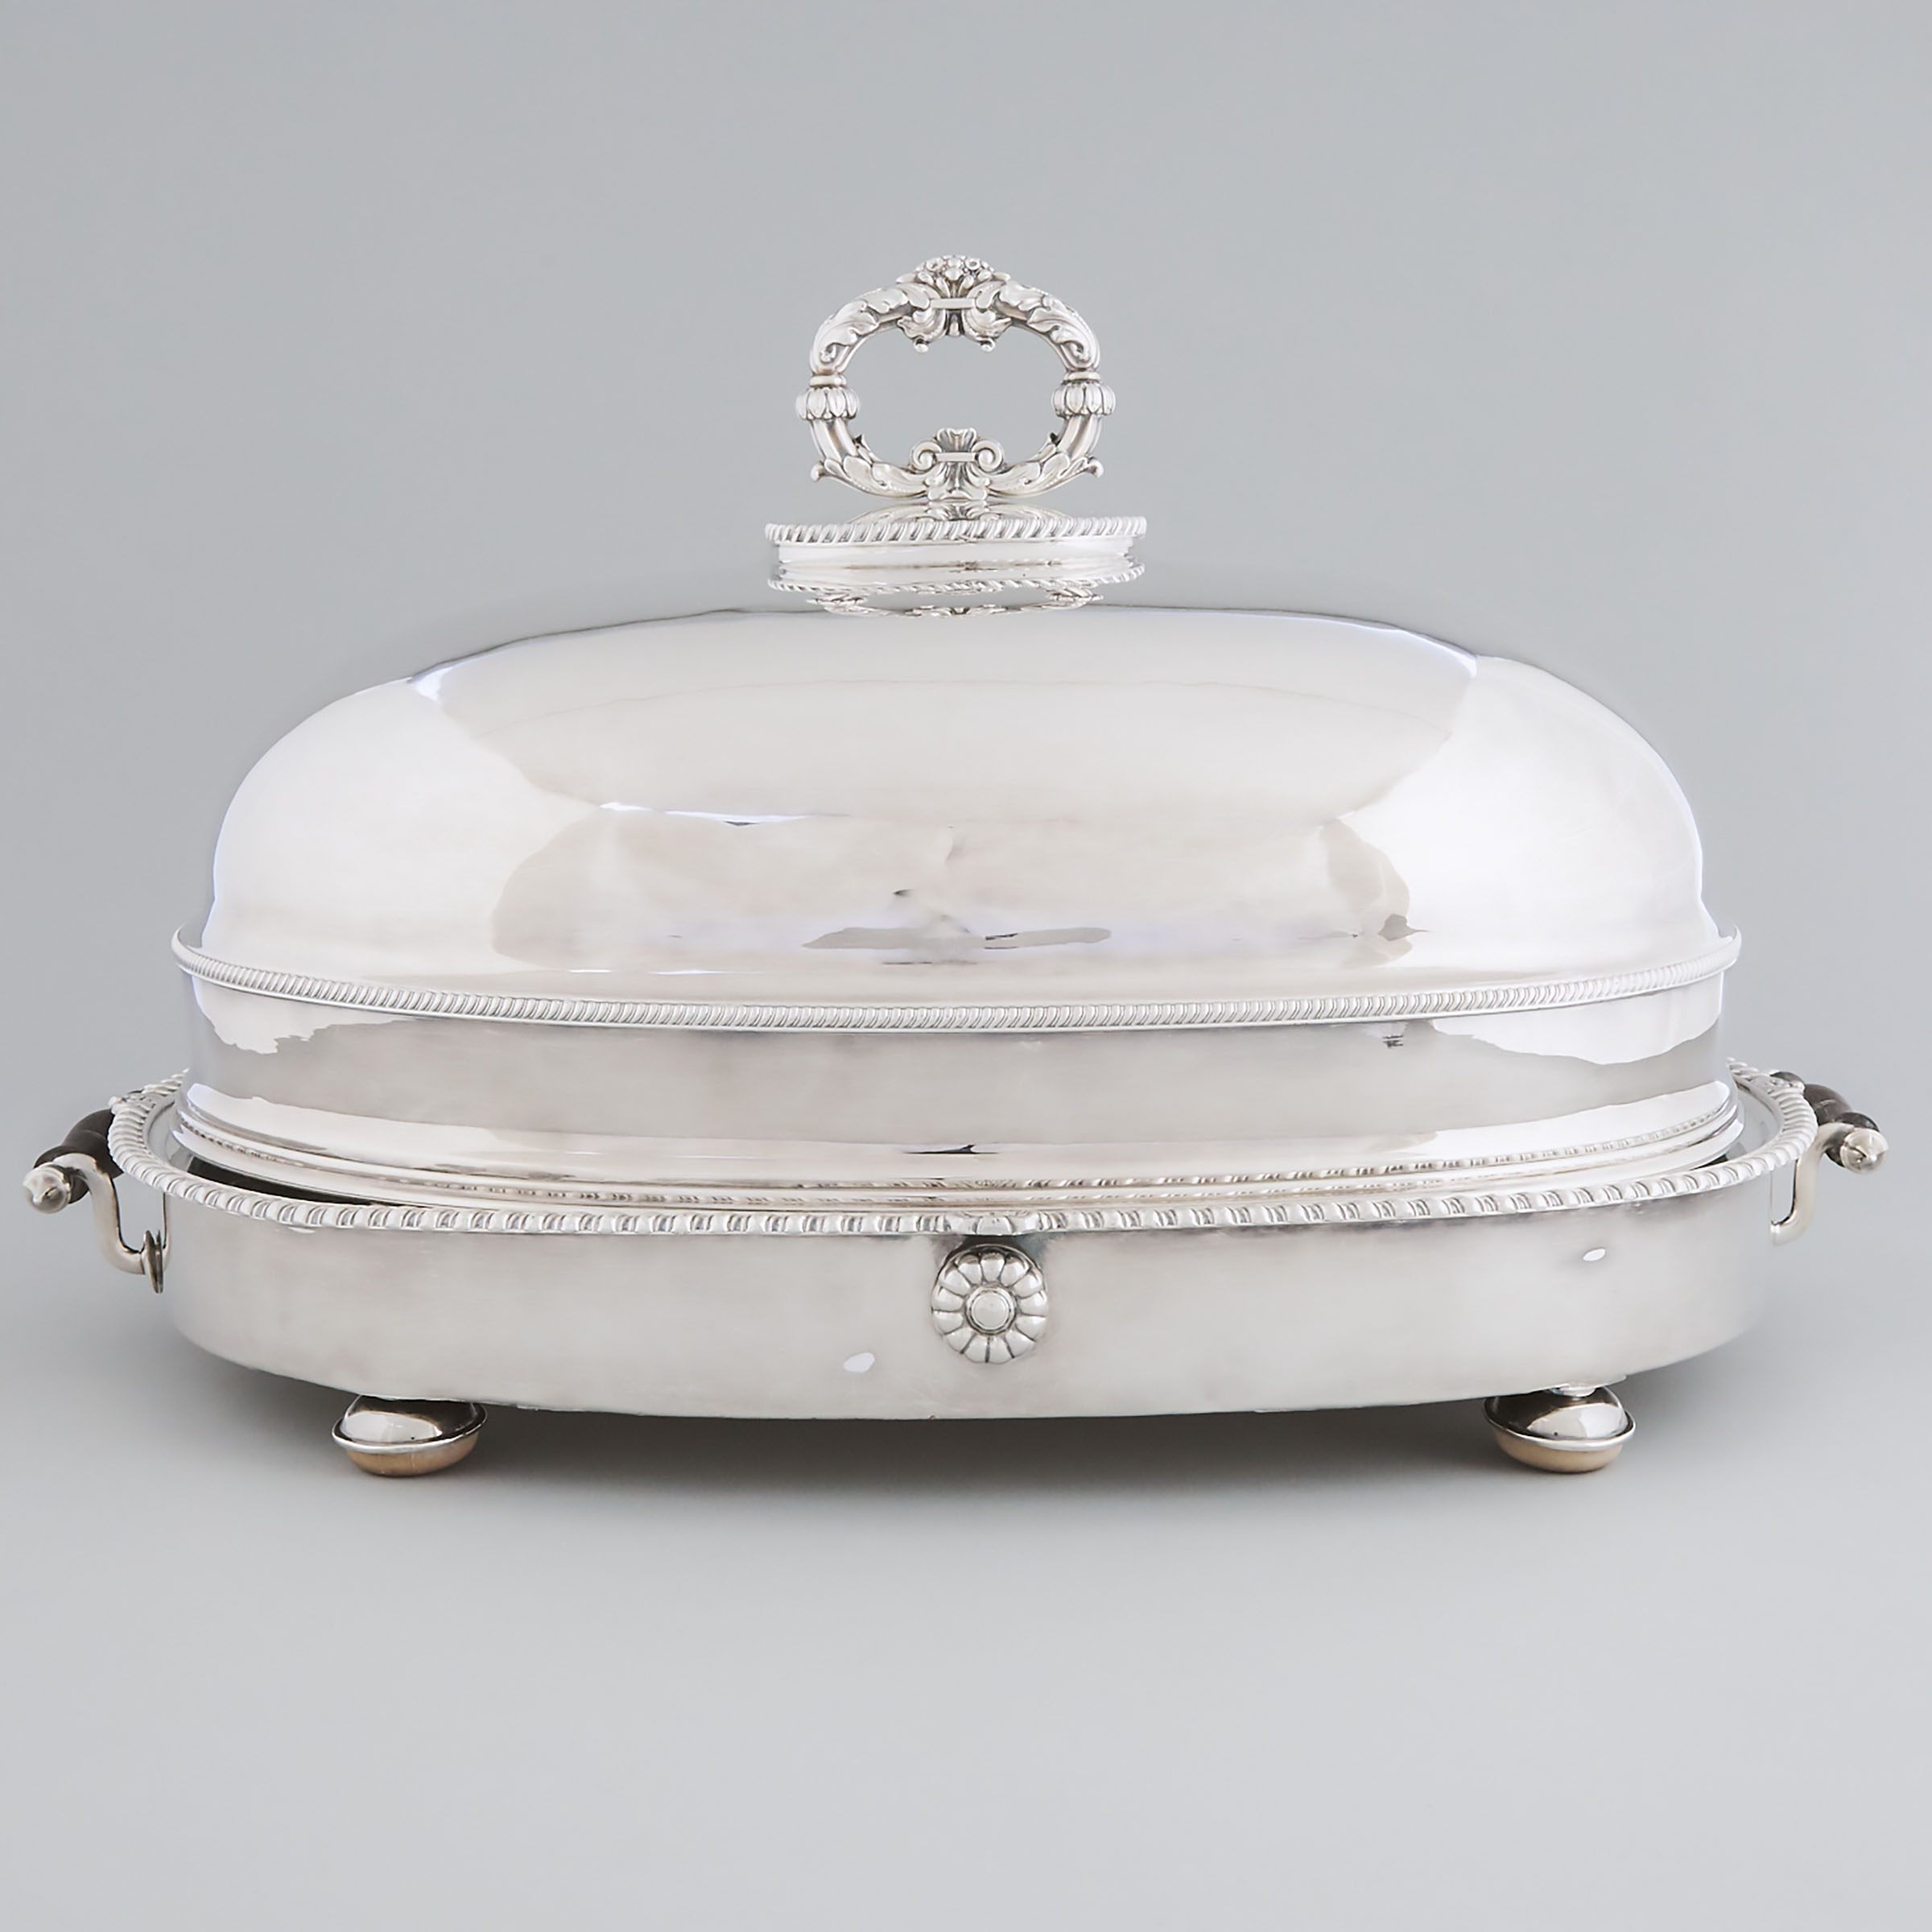 Victorian Silver Plated Oval Well and Tree Venison Dish with a Domed Cover, 19th century